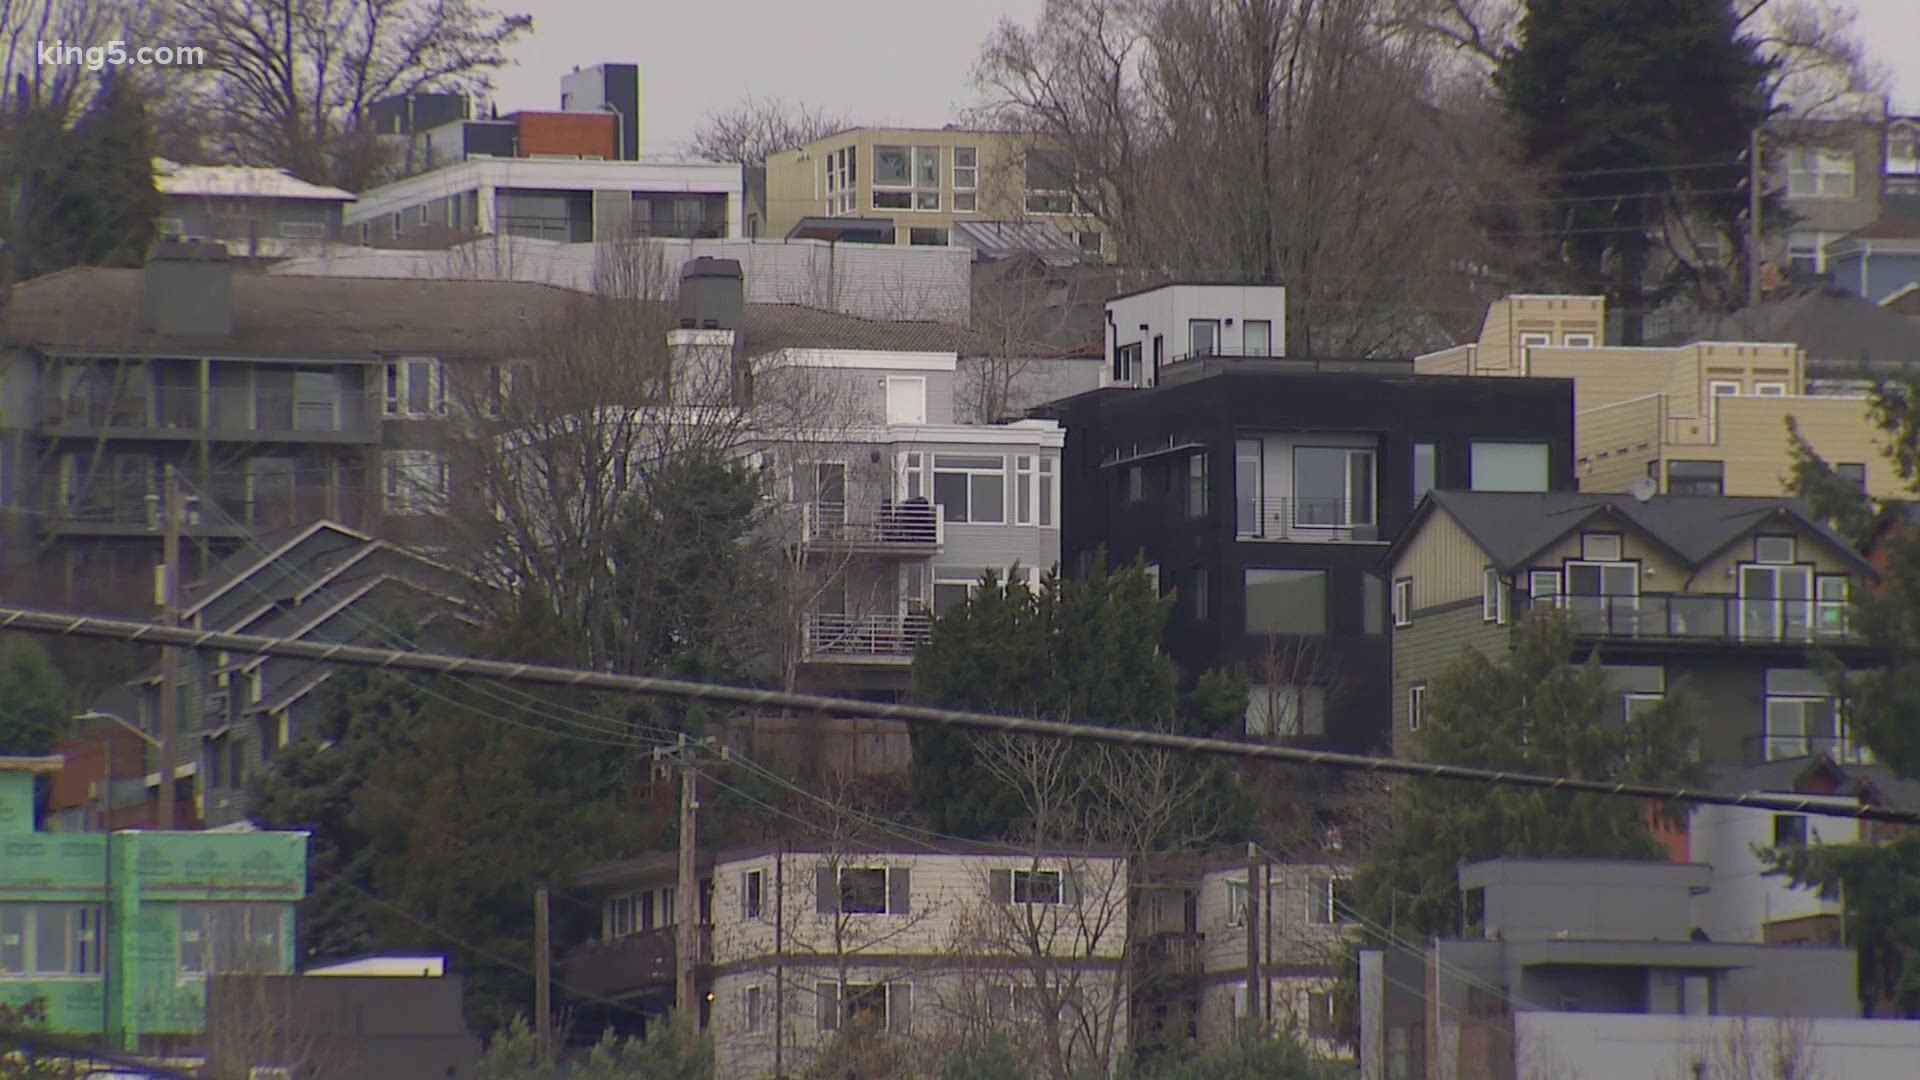 A Washington eviction moratorium that started in March was scheduled to expire next week. It's been extended again through the end of the year.